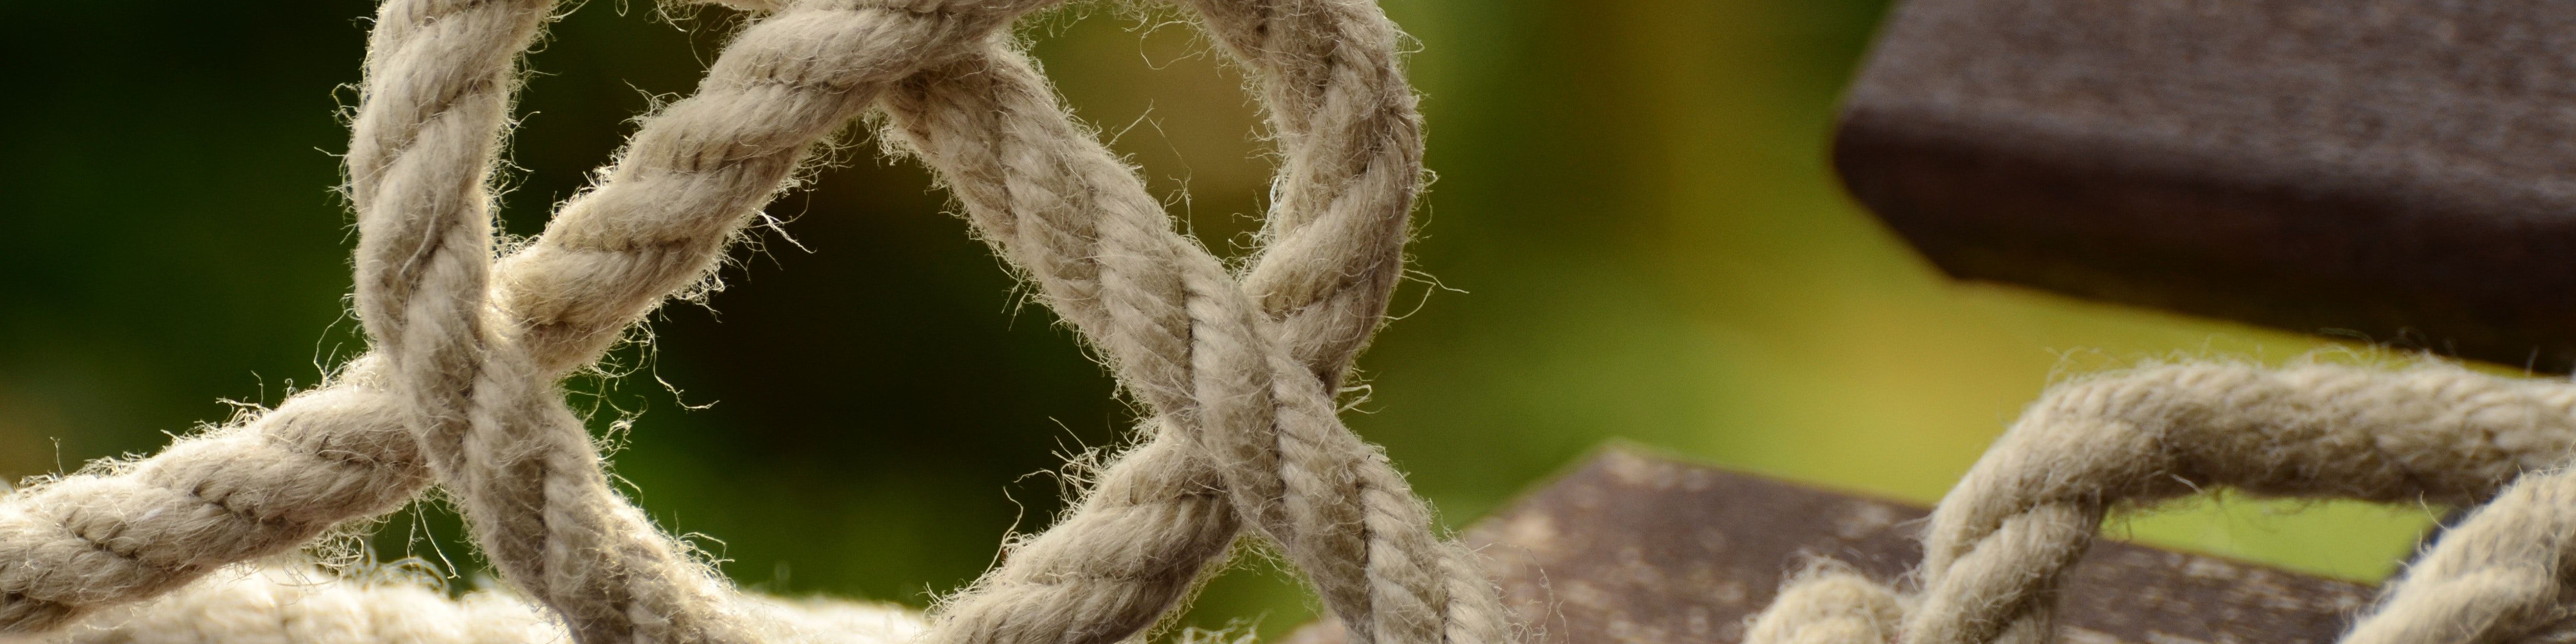 Don’t Tie Yourself in Knots Thinking you can Store Payment Card Verification Codes/Values